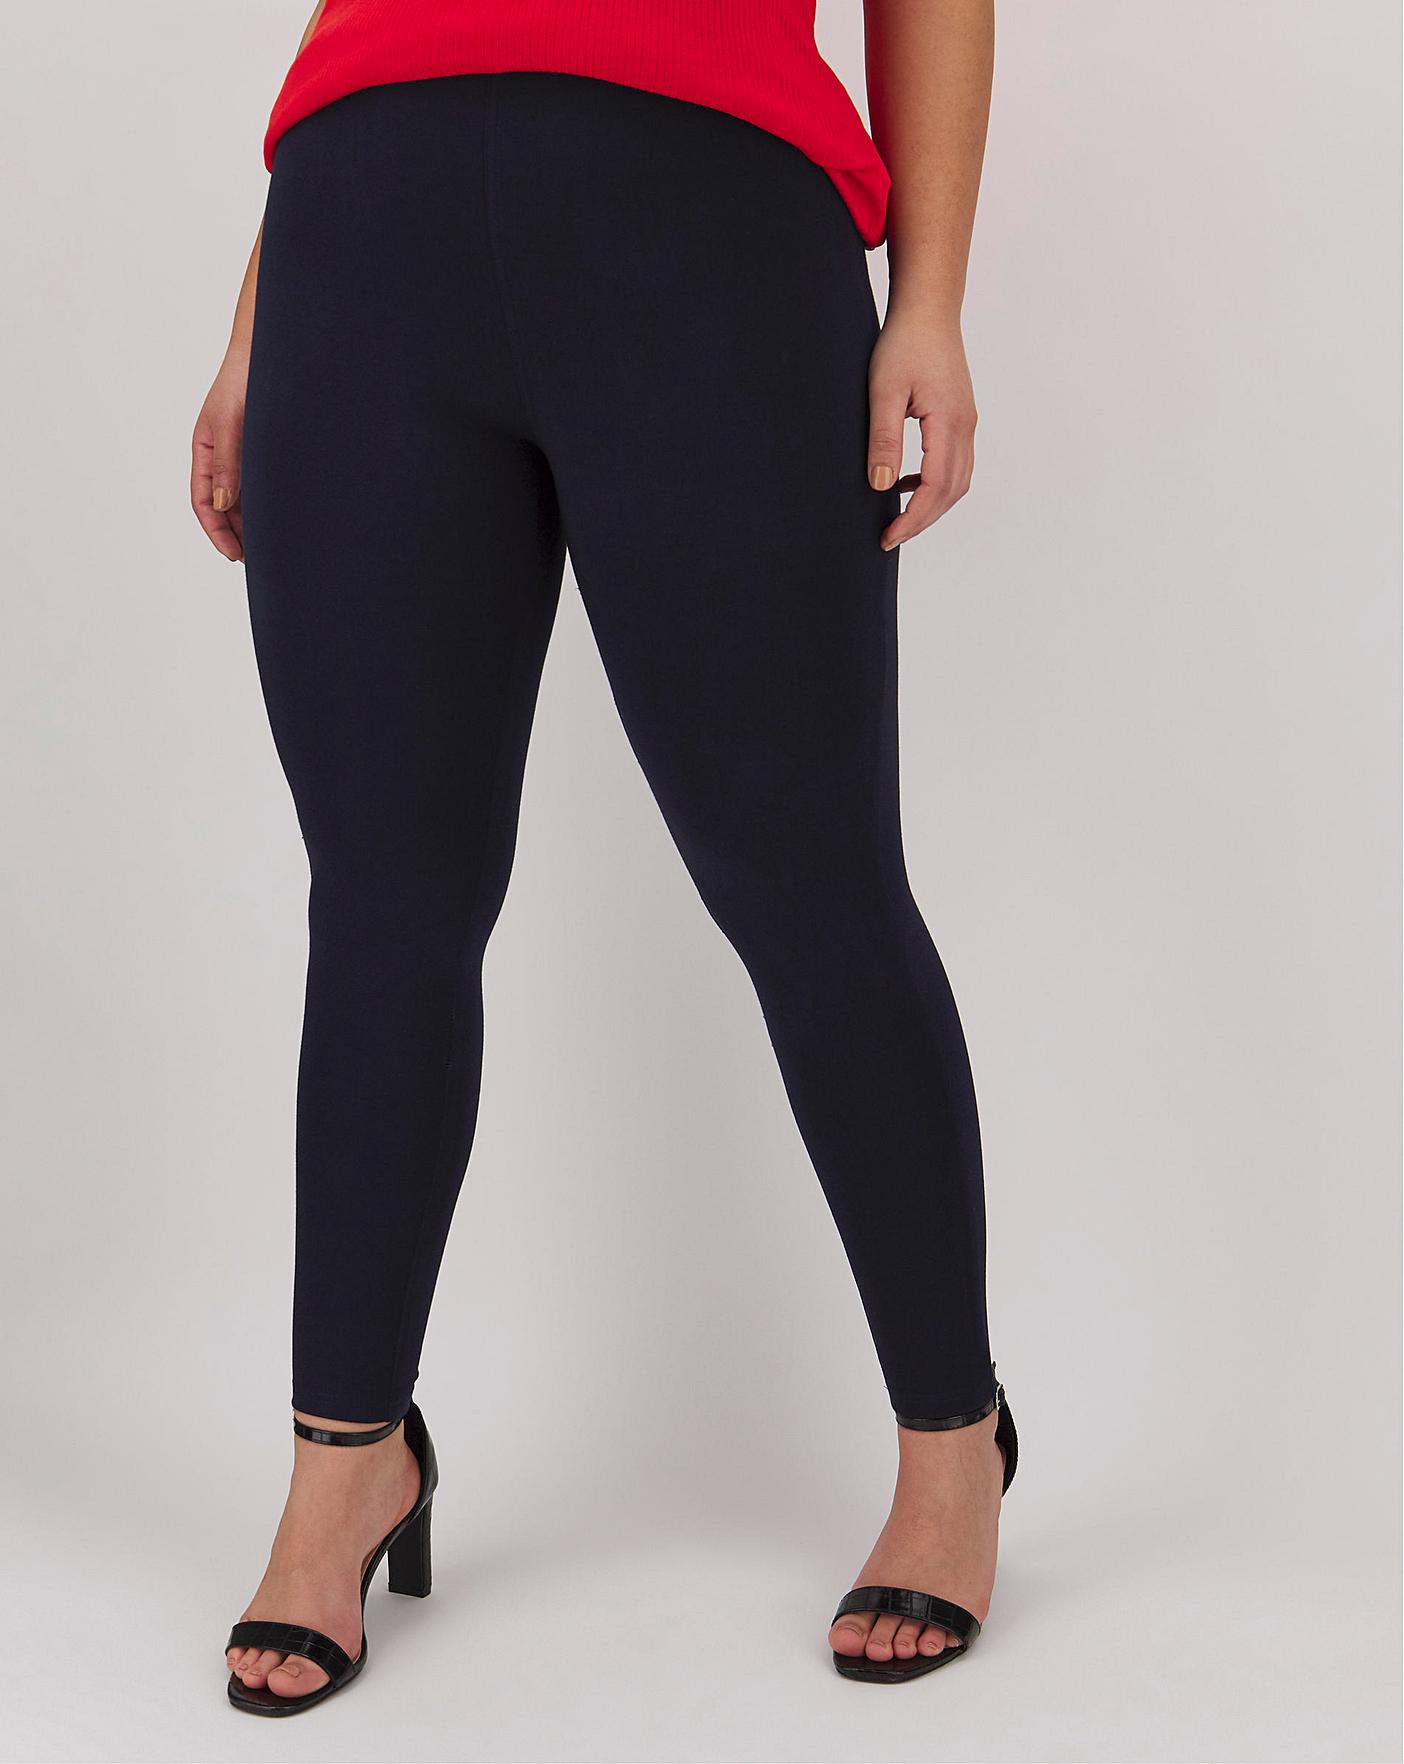 Women's and Plus Size Knee-Length and Ankle Length Leggings